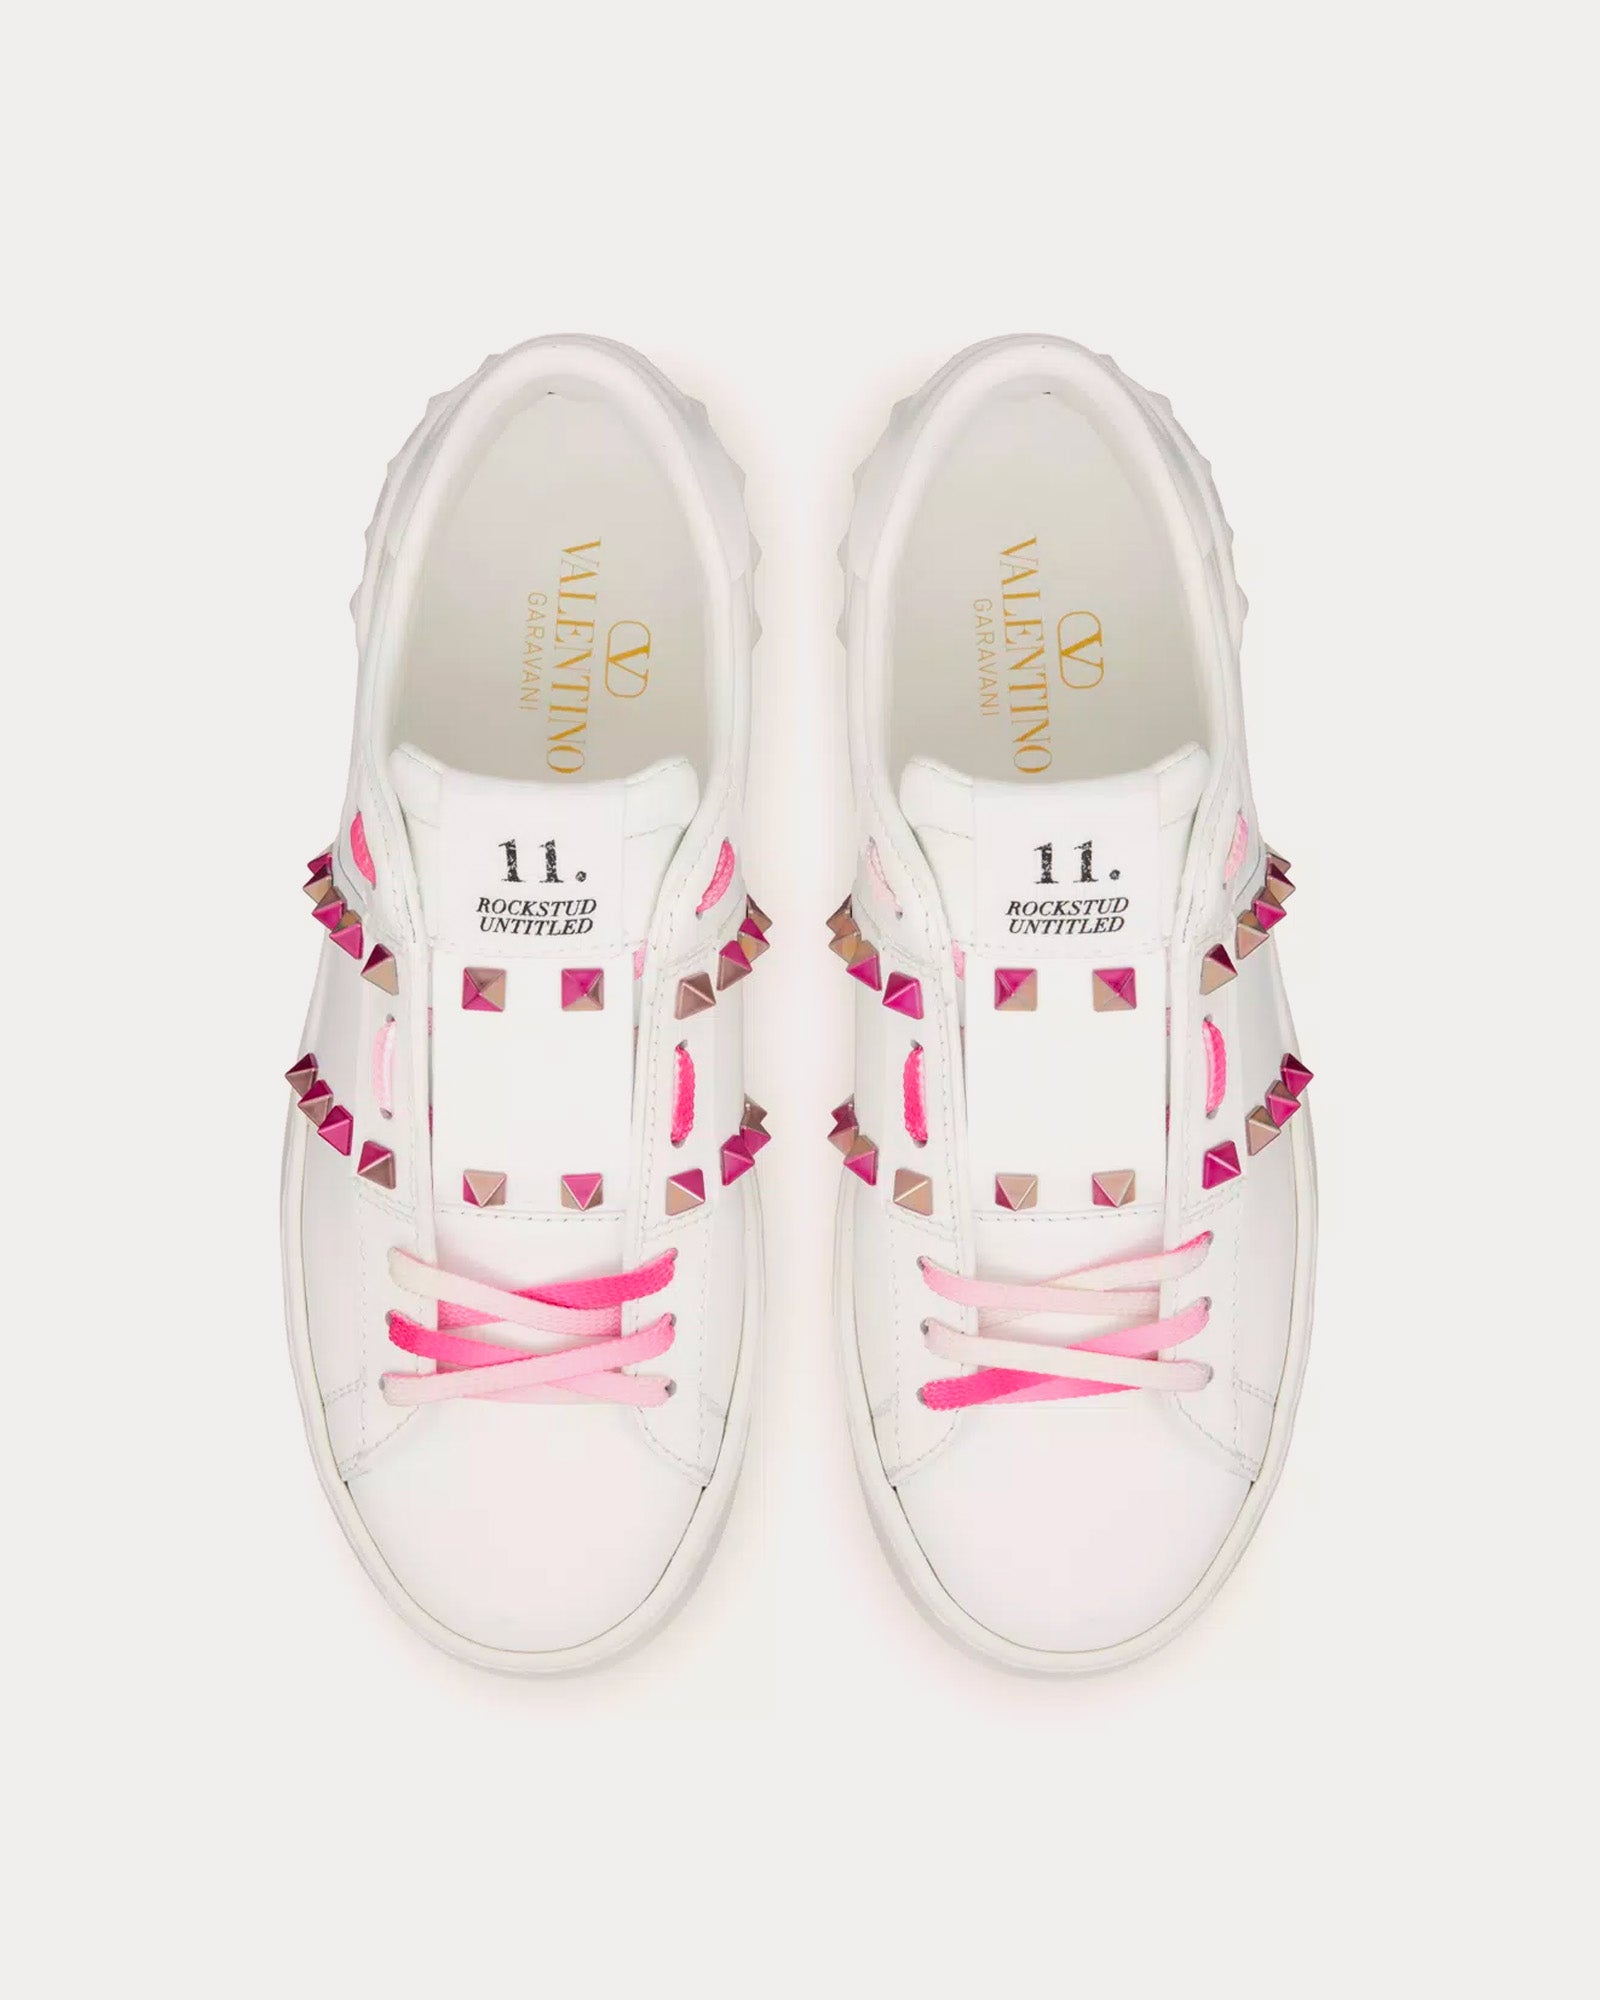 Valentino - Rockstud Untitled Flatform with Studs White / Pink PP Low Top Sneakers